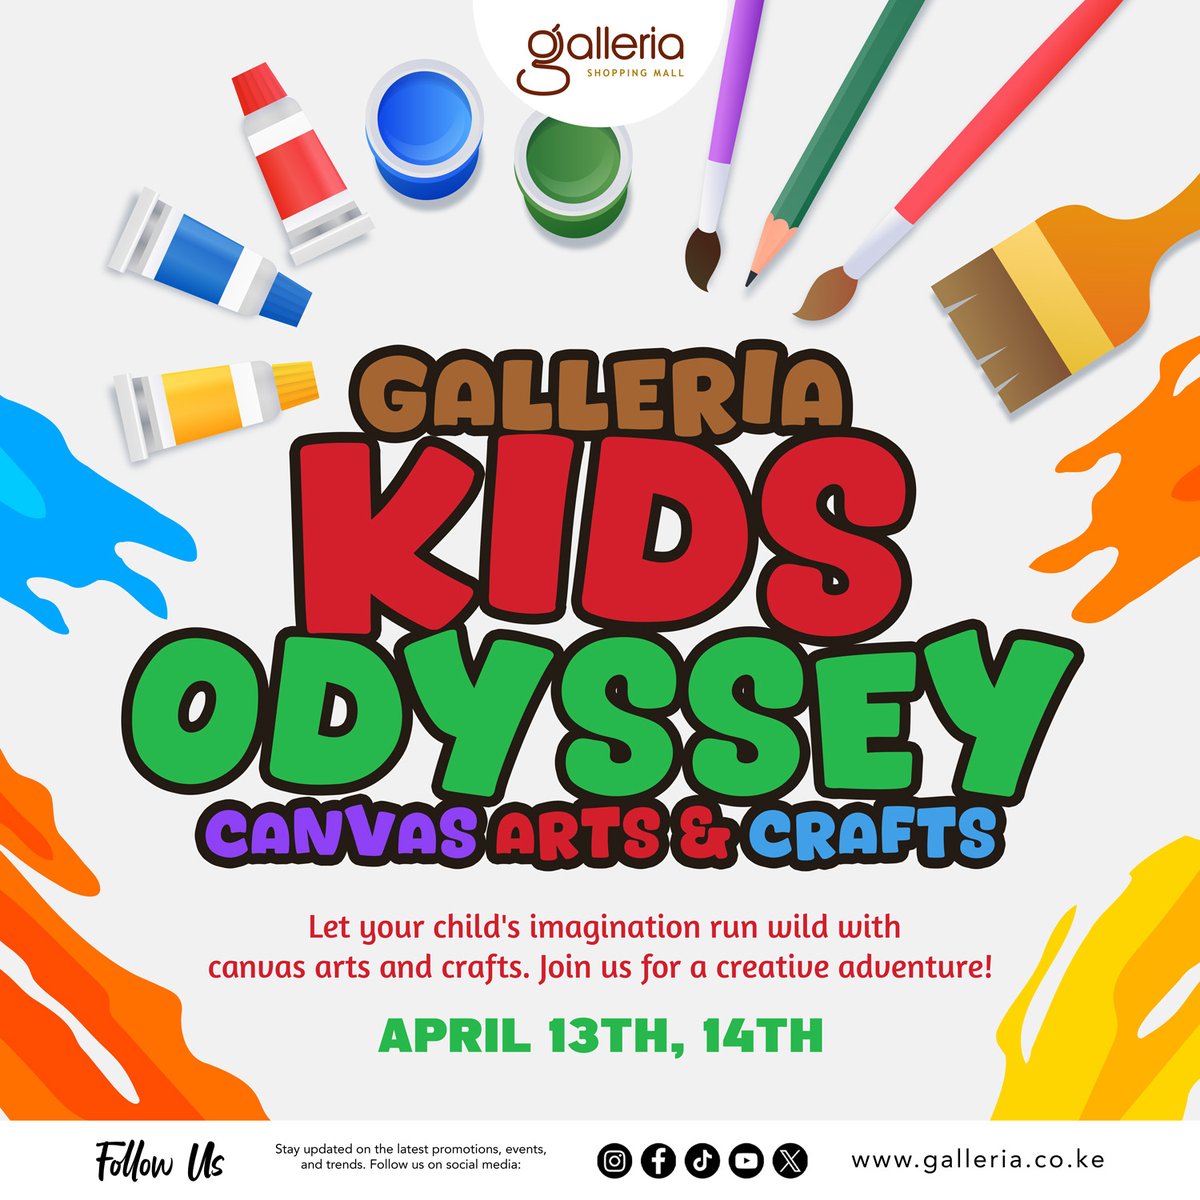 Let your child’s imagination run wild with canvas arts and crafts at our Galleria Kids Odyssey this weekend.

Bring your kids for a creative adventure!

#FunForKids #Fun #Art #Kids #GalleriaShoppingMall #Karen #Nairobi